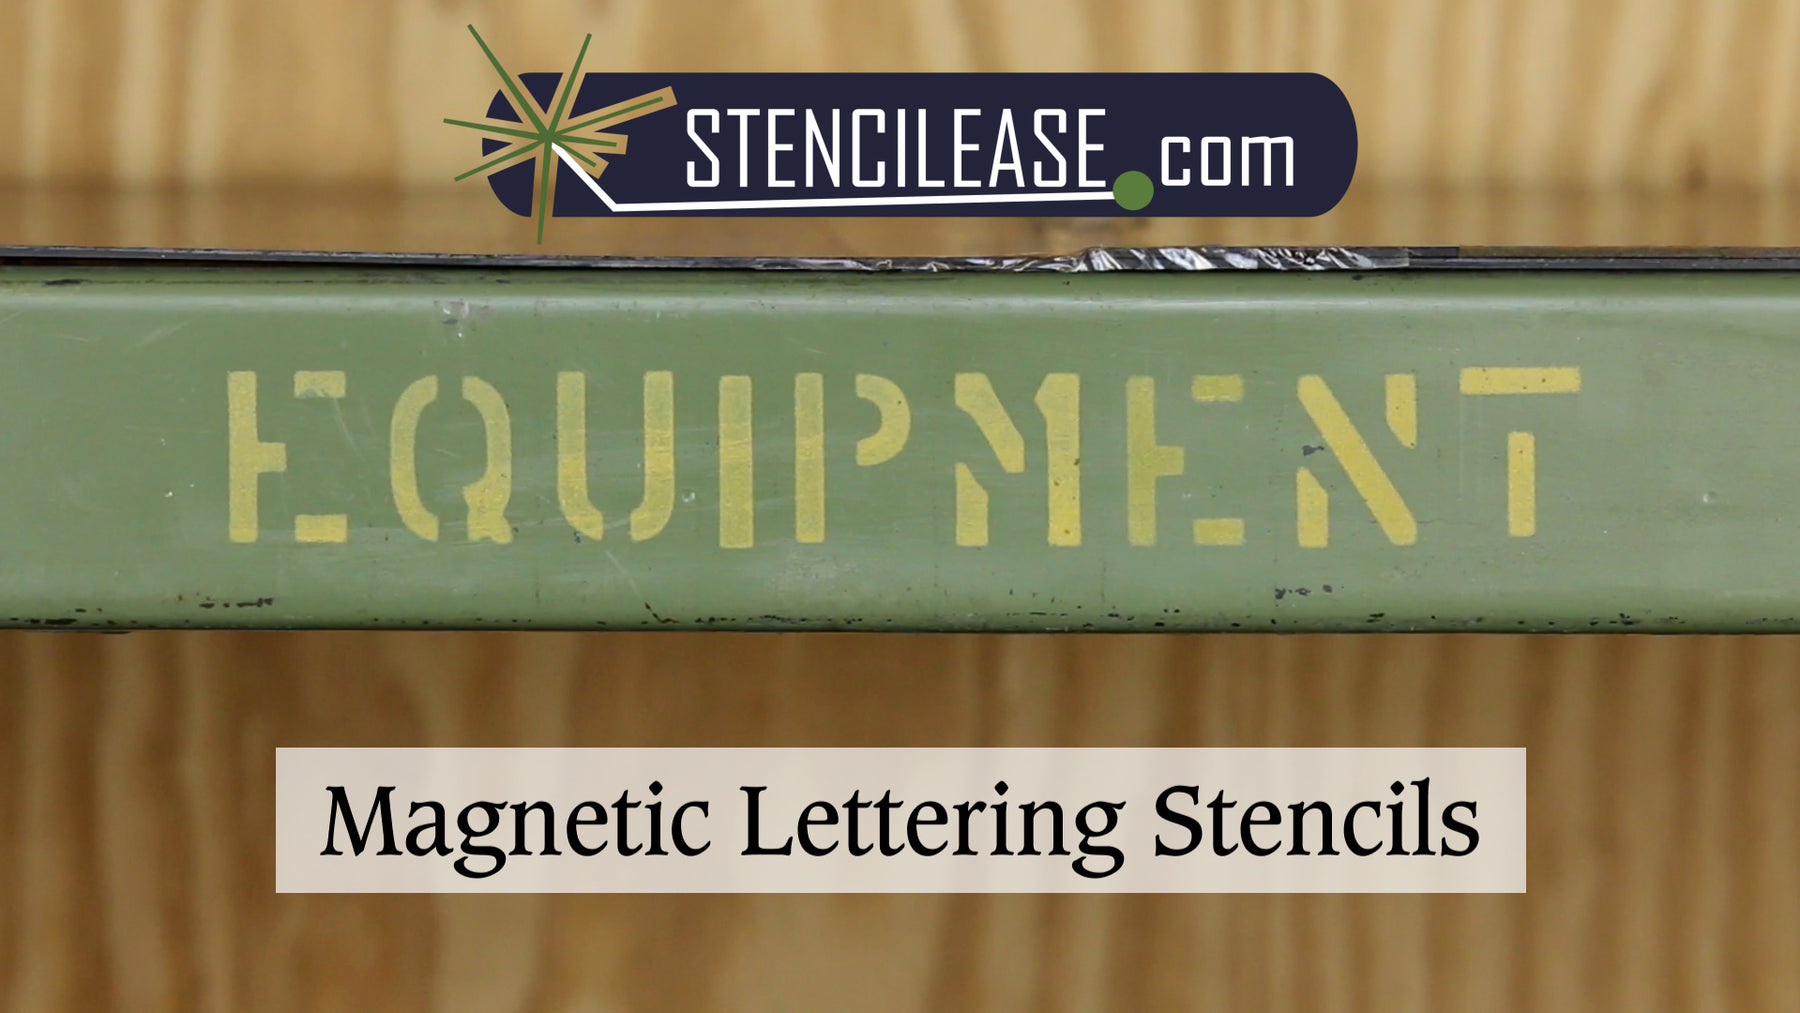 Labeling Metal Surfaces Using Stencil Ease Magnetic Lettering Stencils